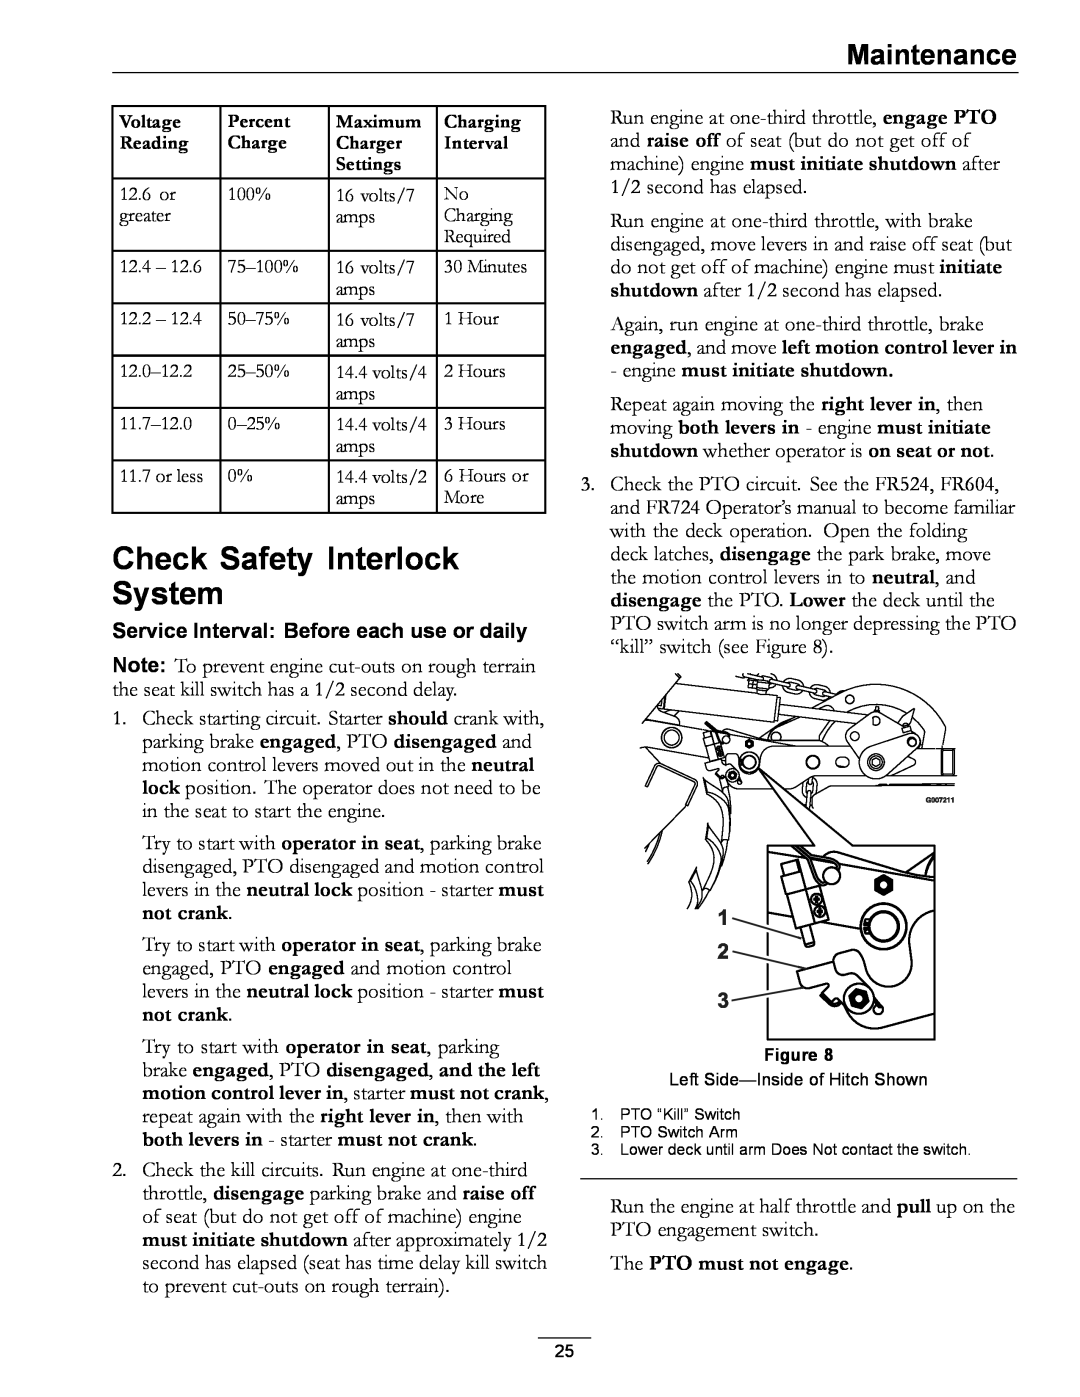 Exmark 720000 & Higher Check Safety Interlock System, engine must initiate shutdown, The PTO must not engage, Maintenance 